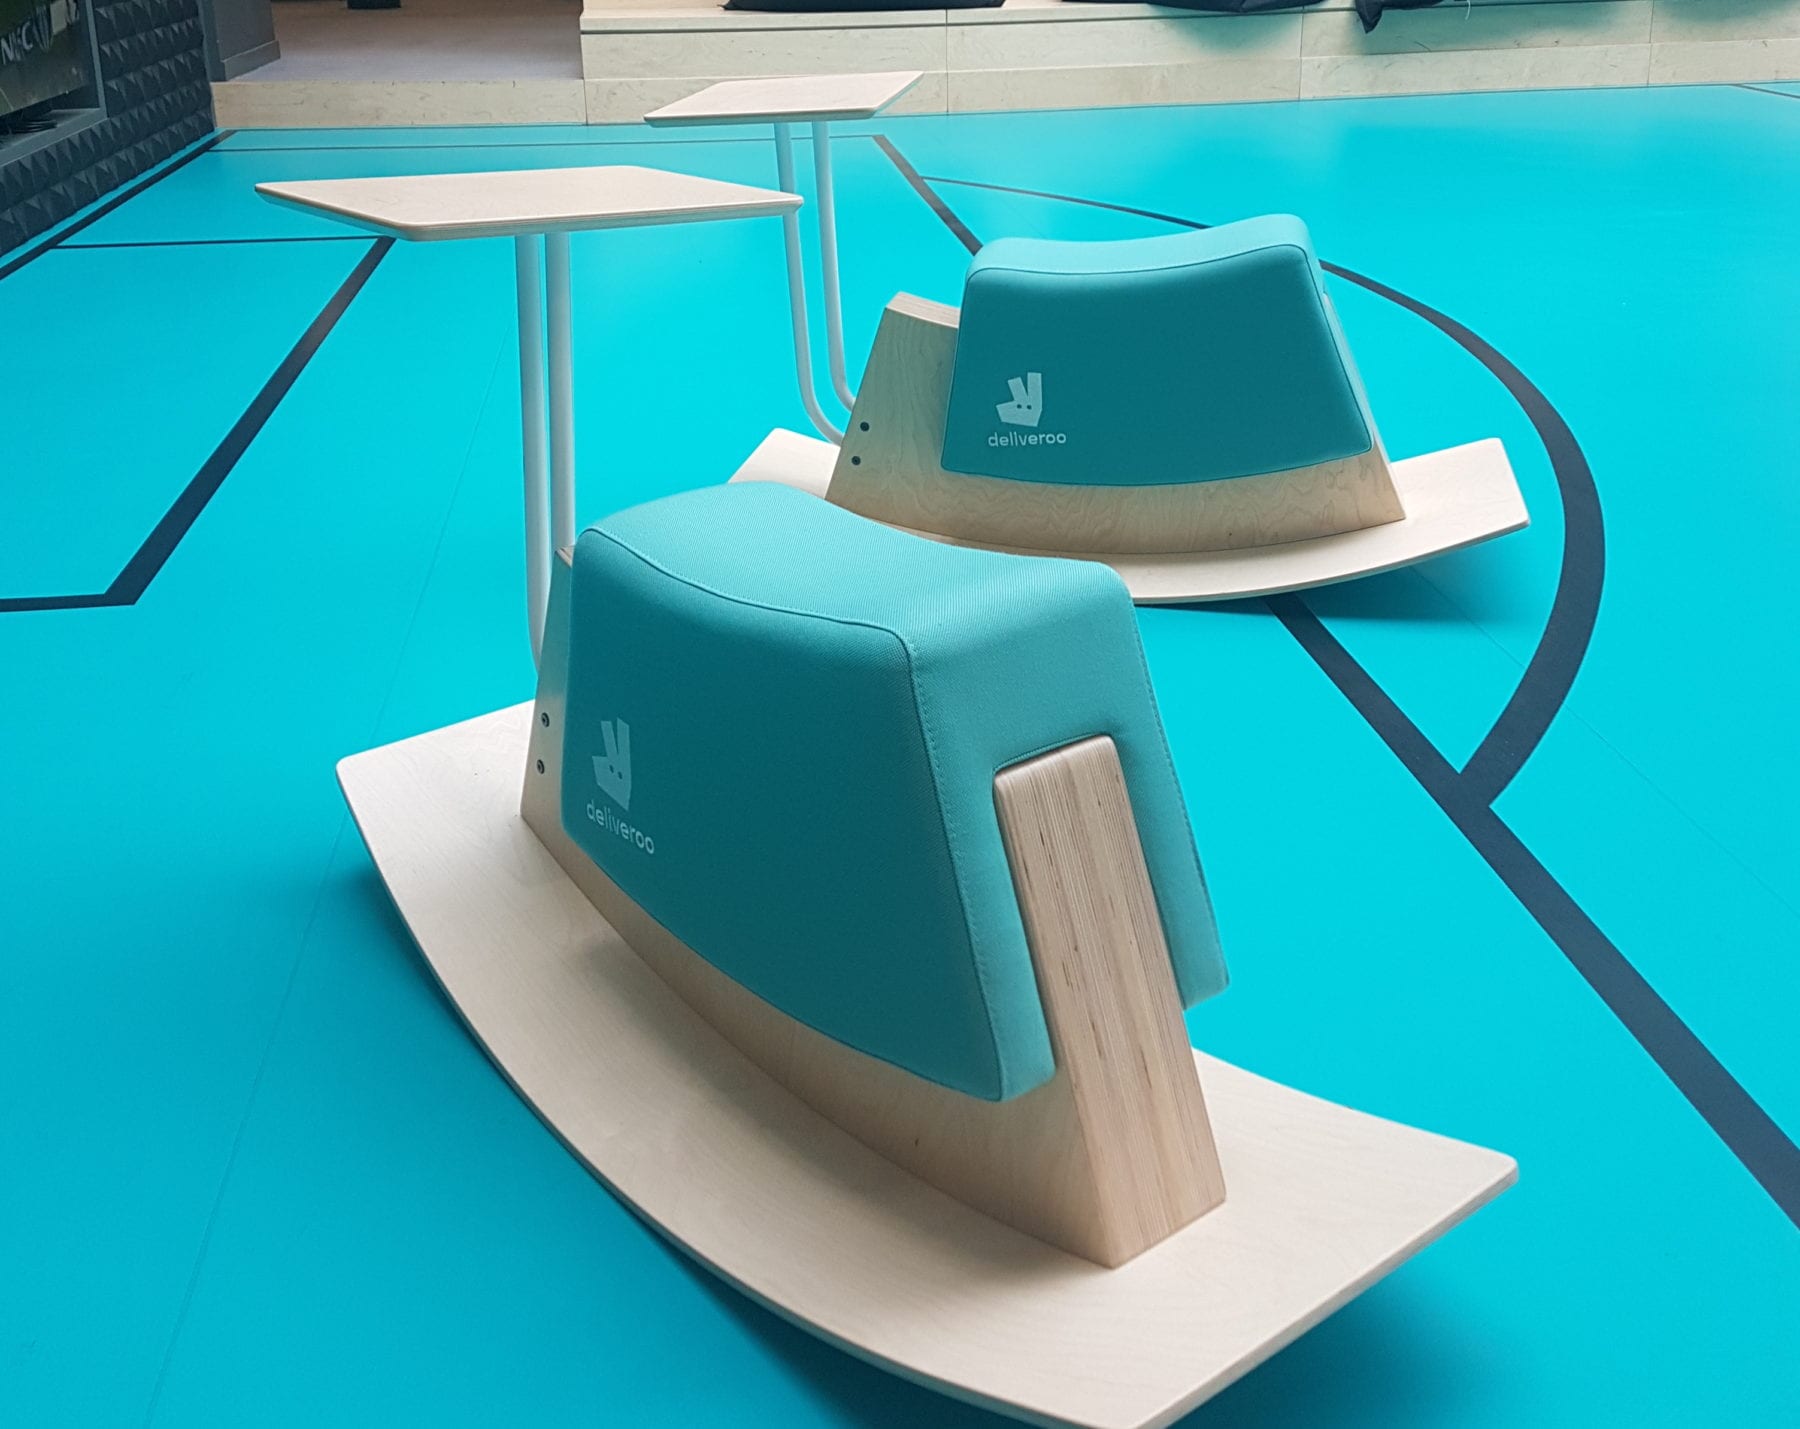 Deliveroo branded Rokkadots by Workagile